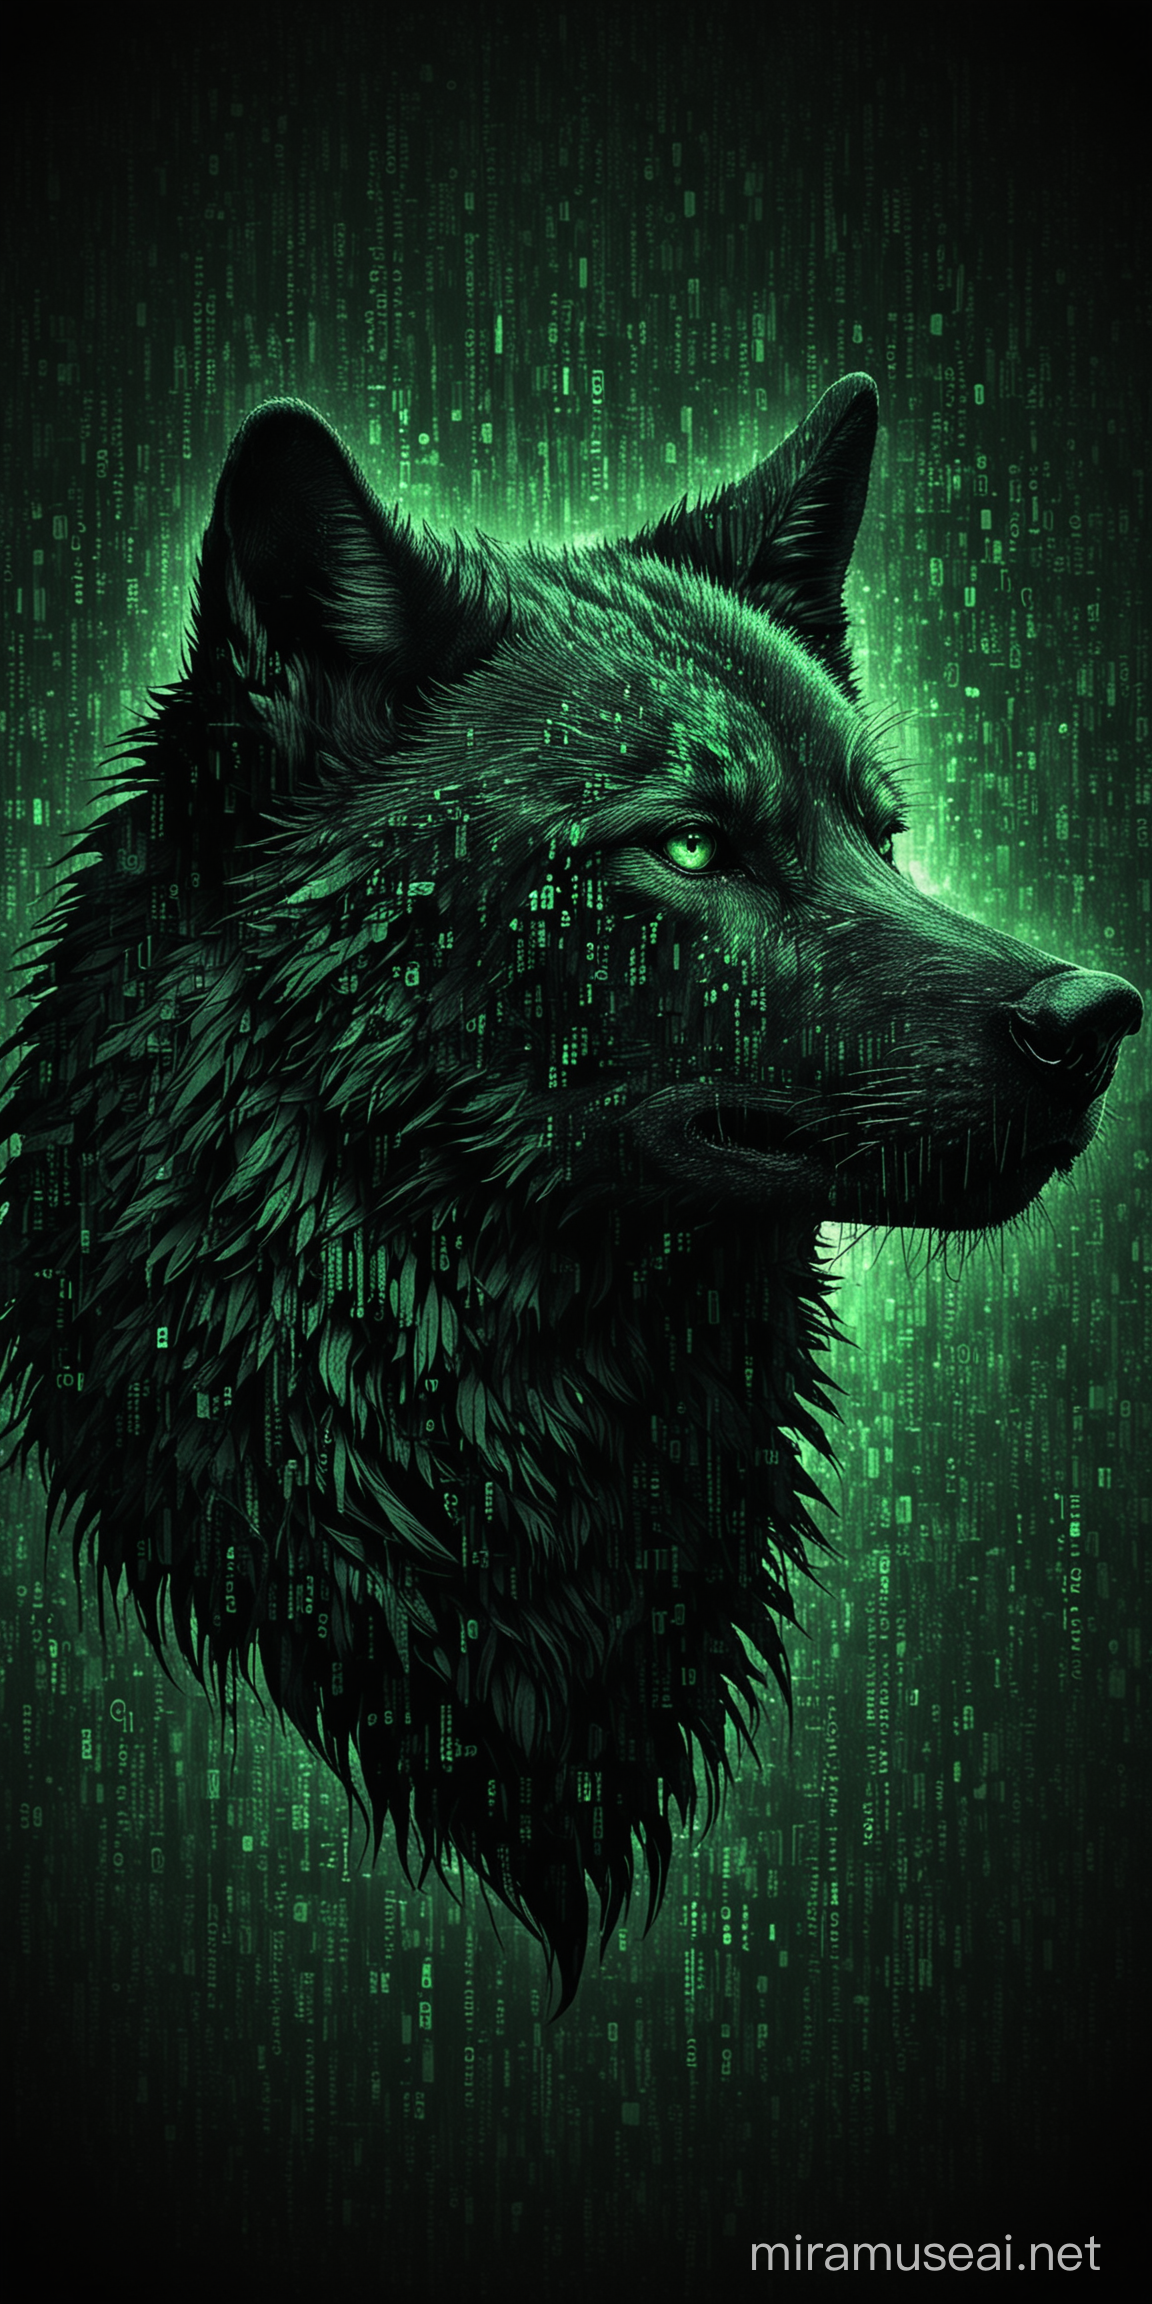 Wallpaper of a wolf head silhouette in black with green matrix coding in the background.